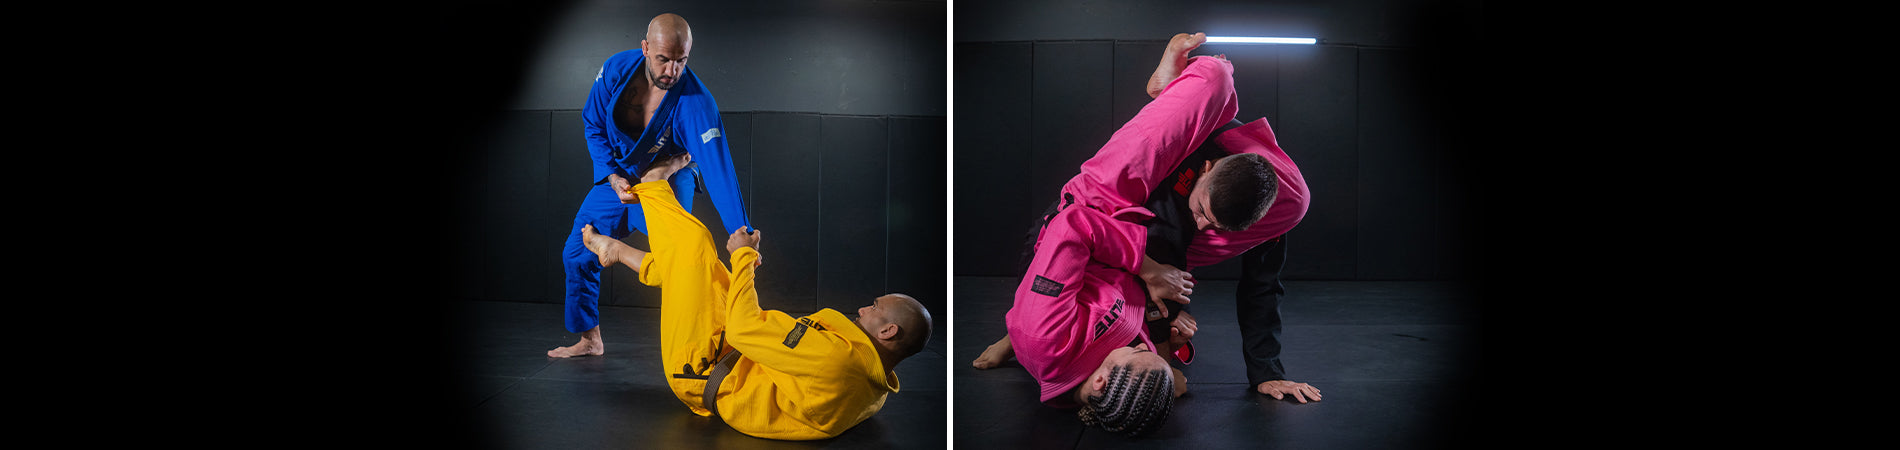 Defensive or Offensive Approach - Which one is Right For BJJ?